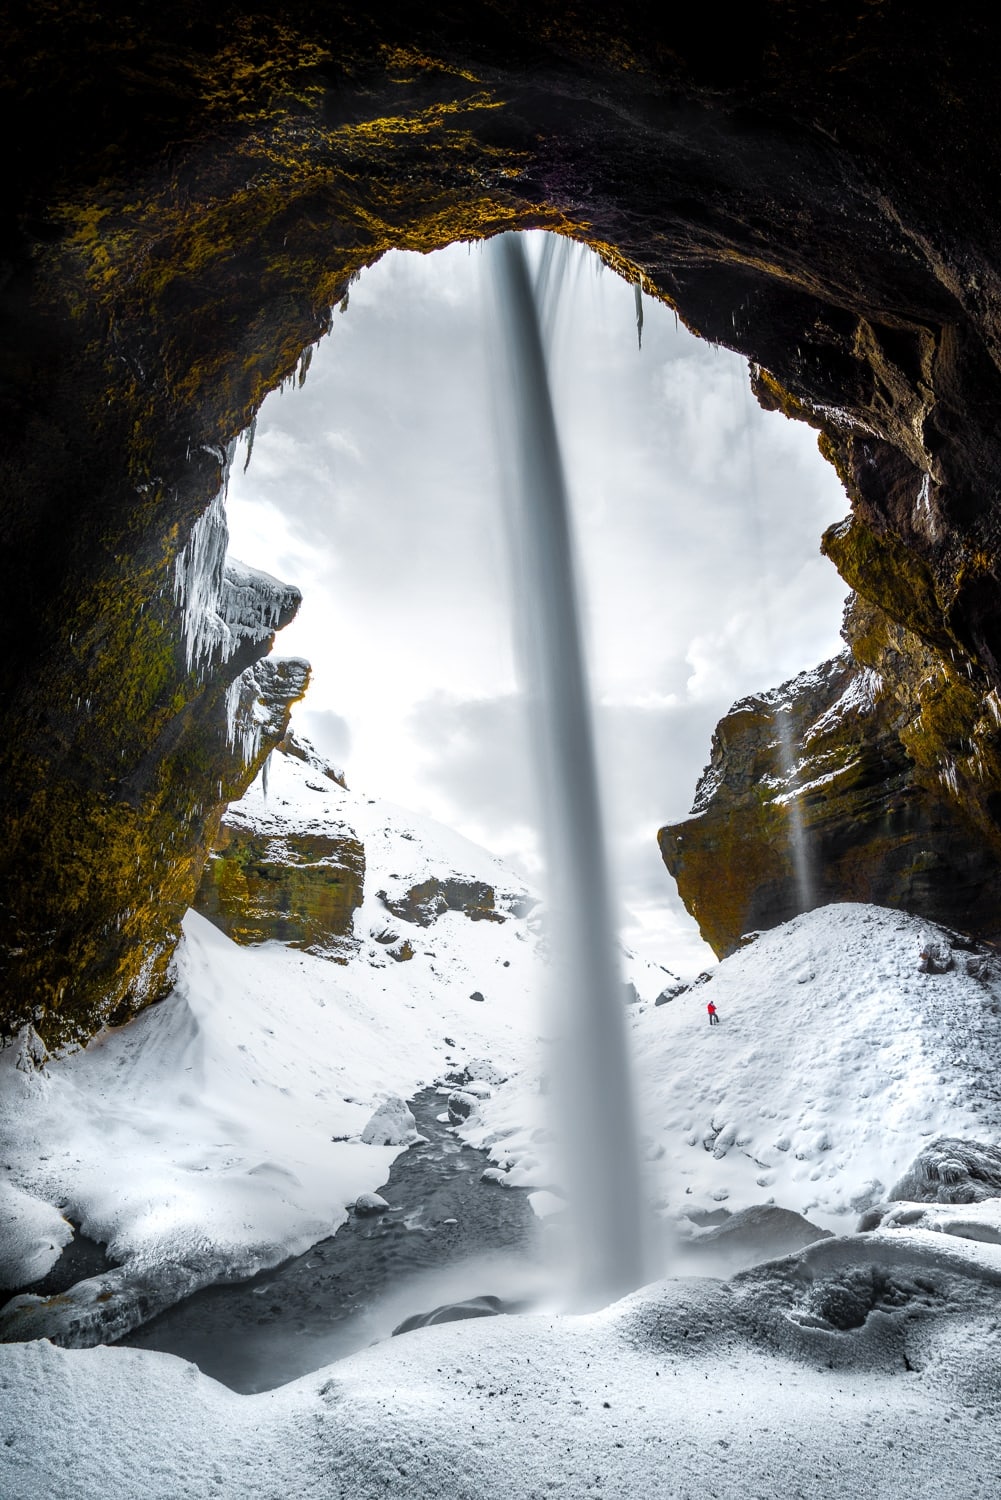 Behind the Wintery Falls